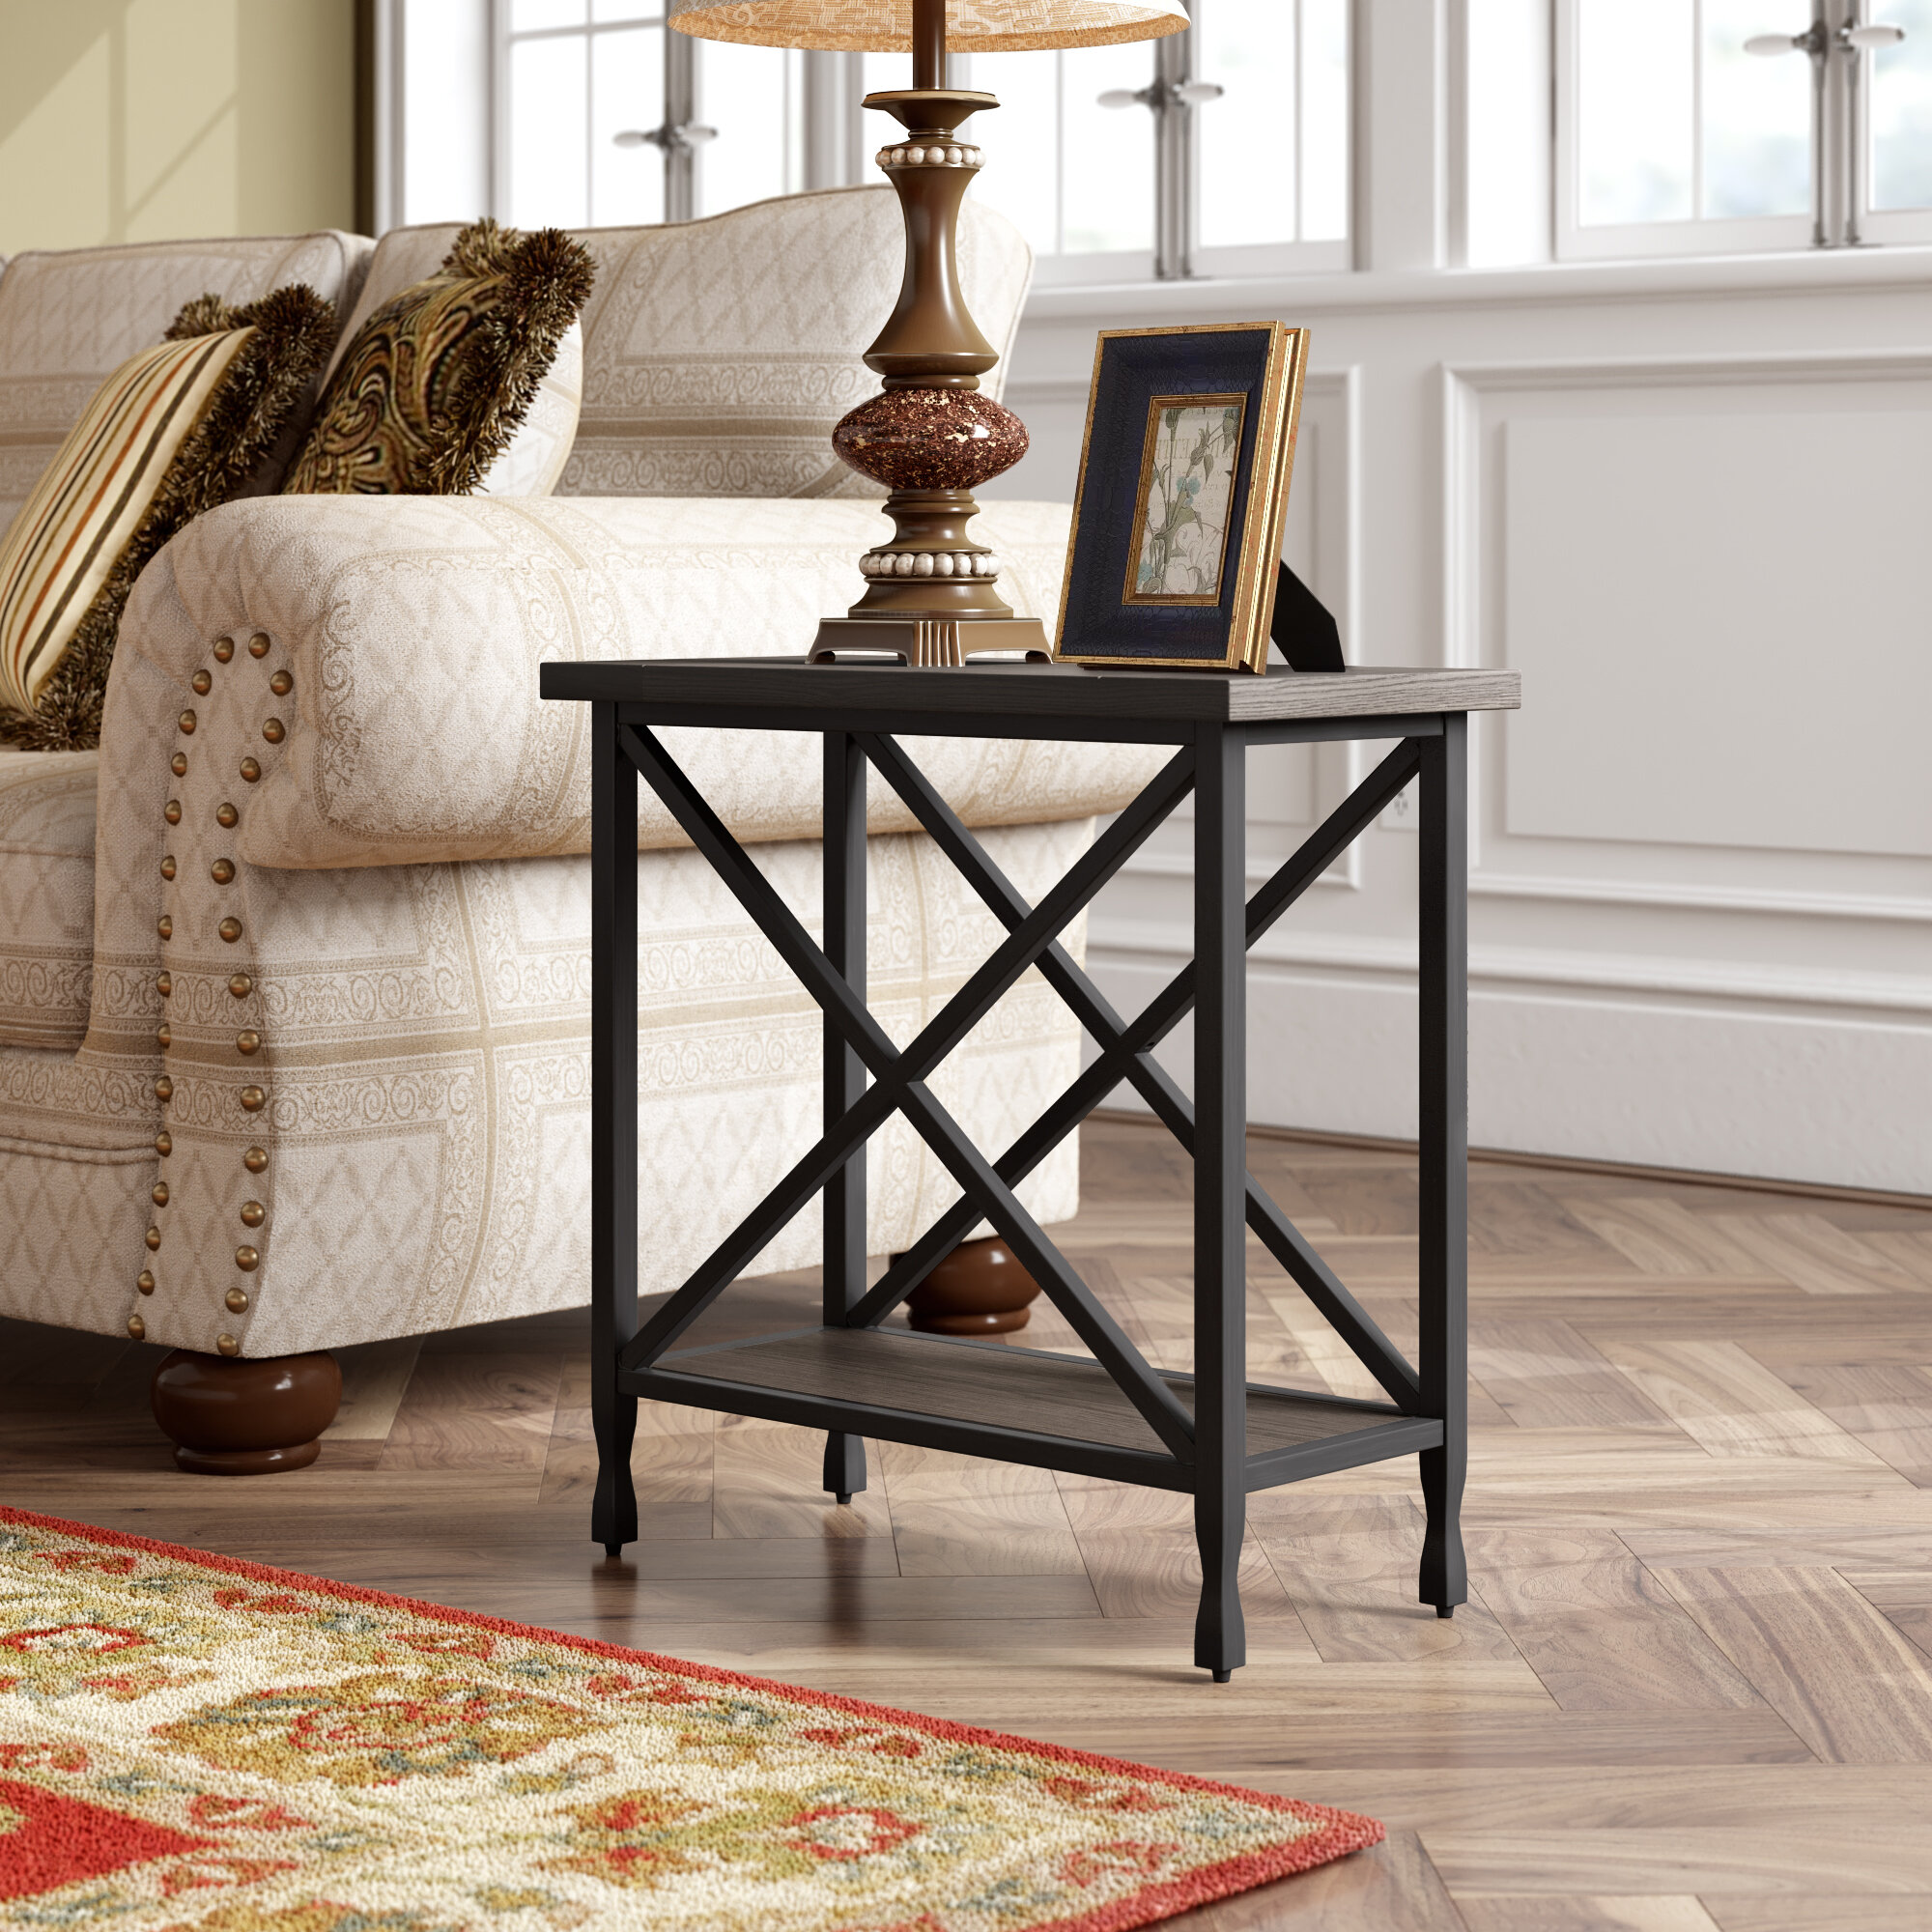 small end table Distressed black wood side table 